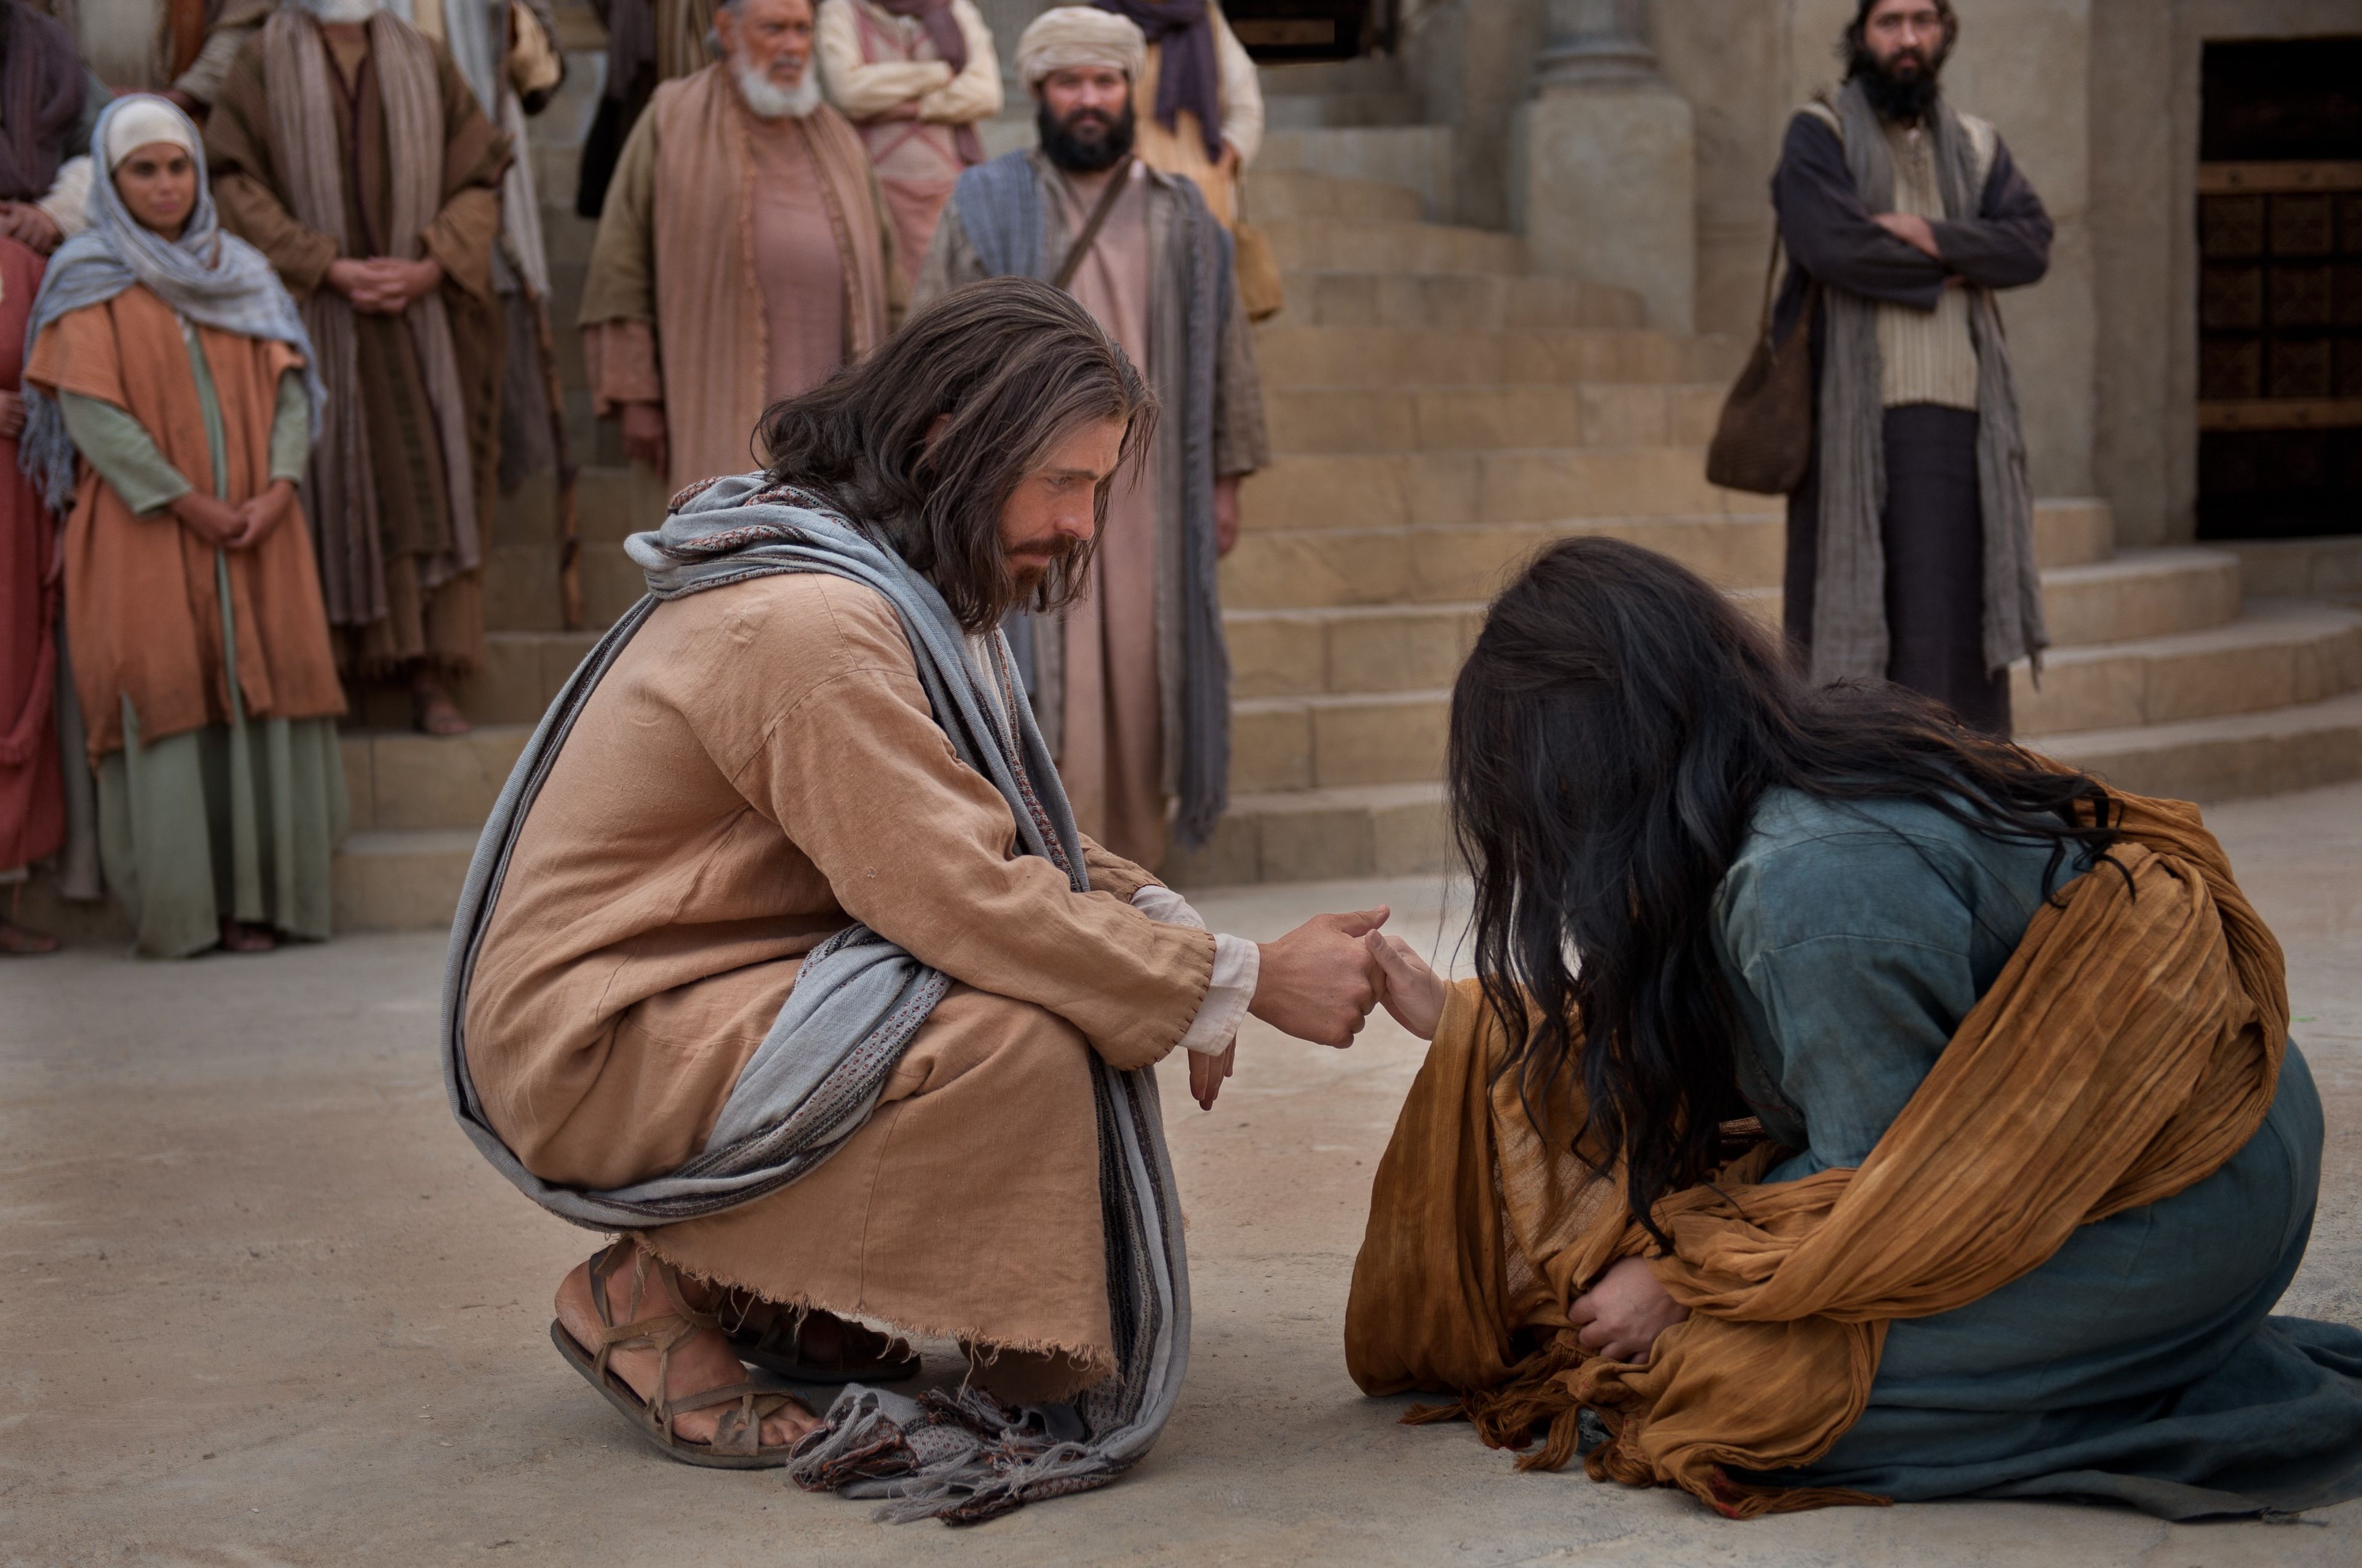 Jesus reaches out to help the woman taken in adultery.